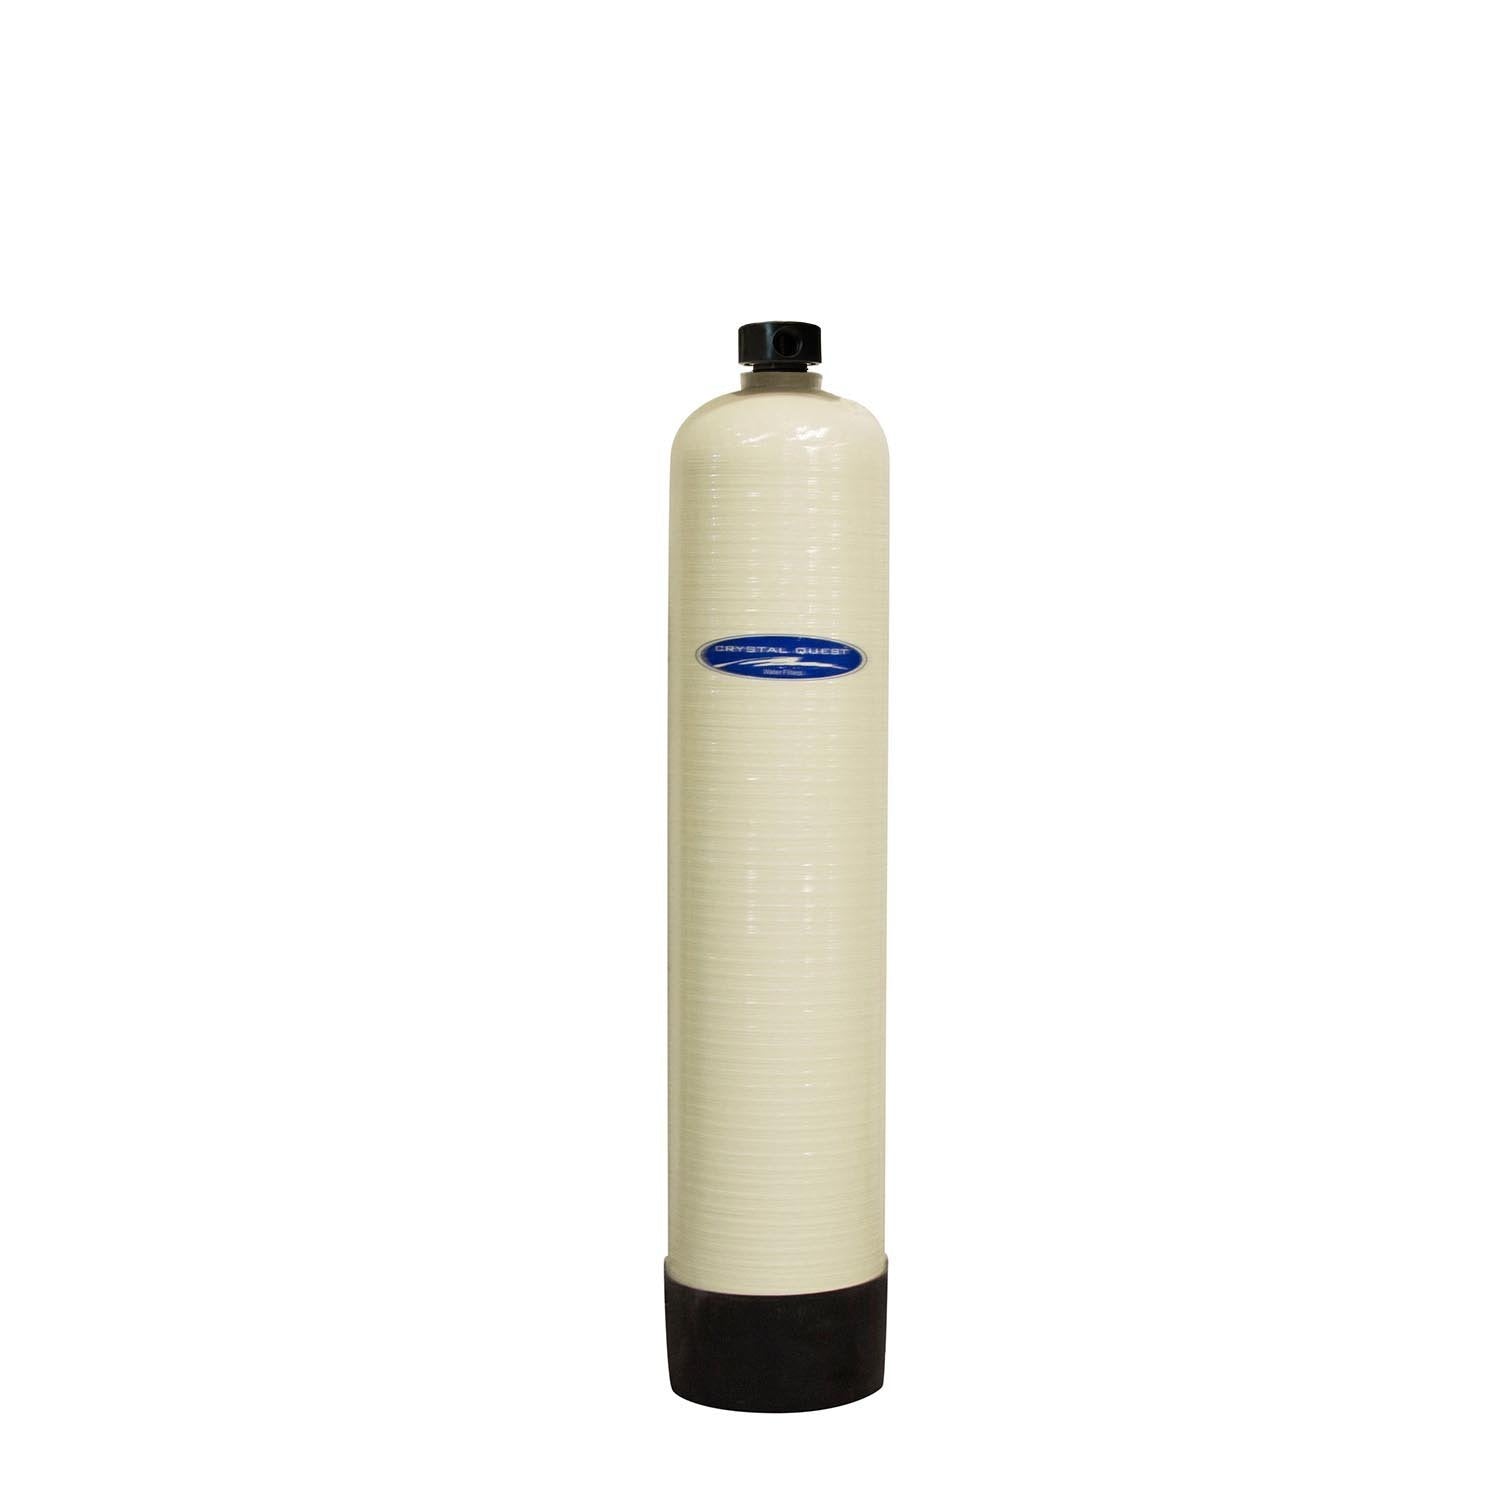 30 GPM Commercial Salt-Free Water Softener (Anti-Scale) System | 12.5 liters - Commercial - Crystal Quest Water Filters